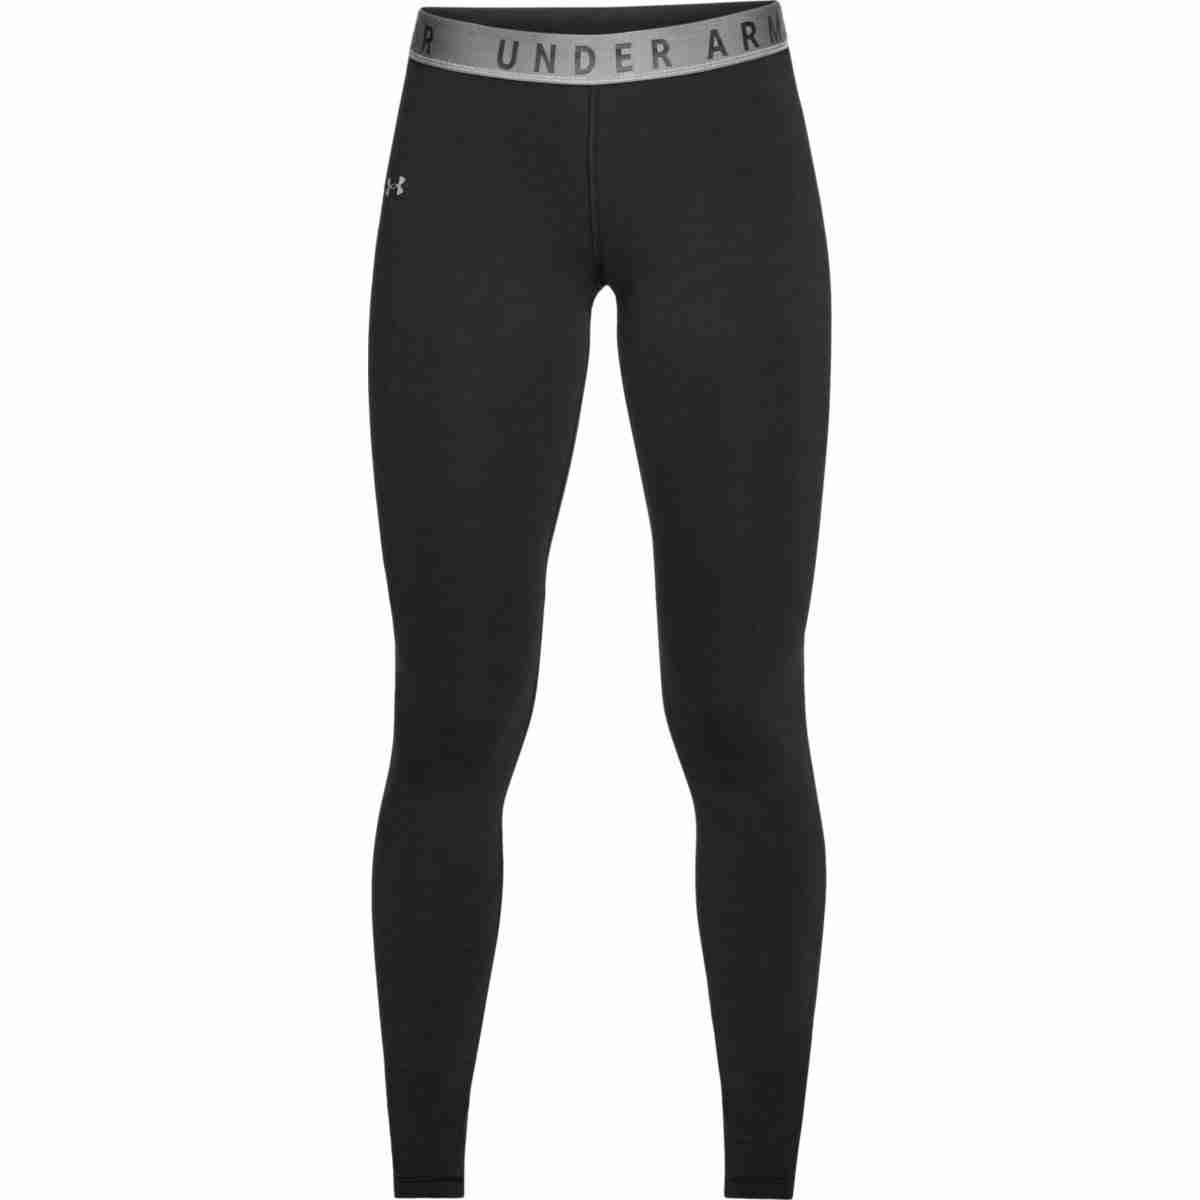 Under Armour Women Favorites Legging – a quality product from a quality brand